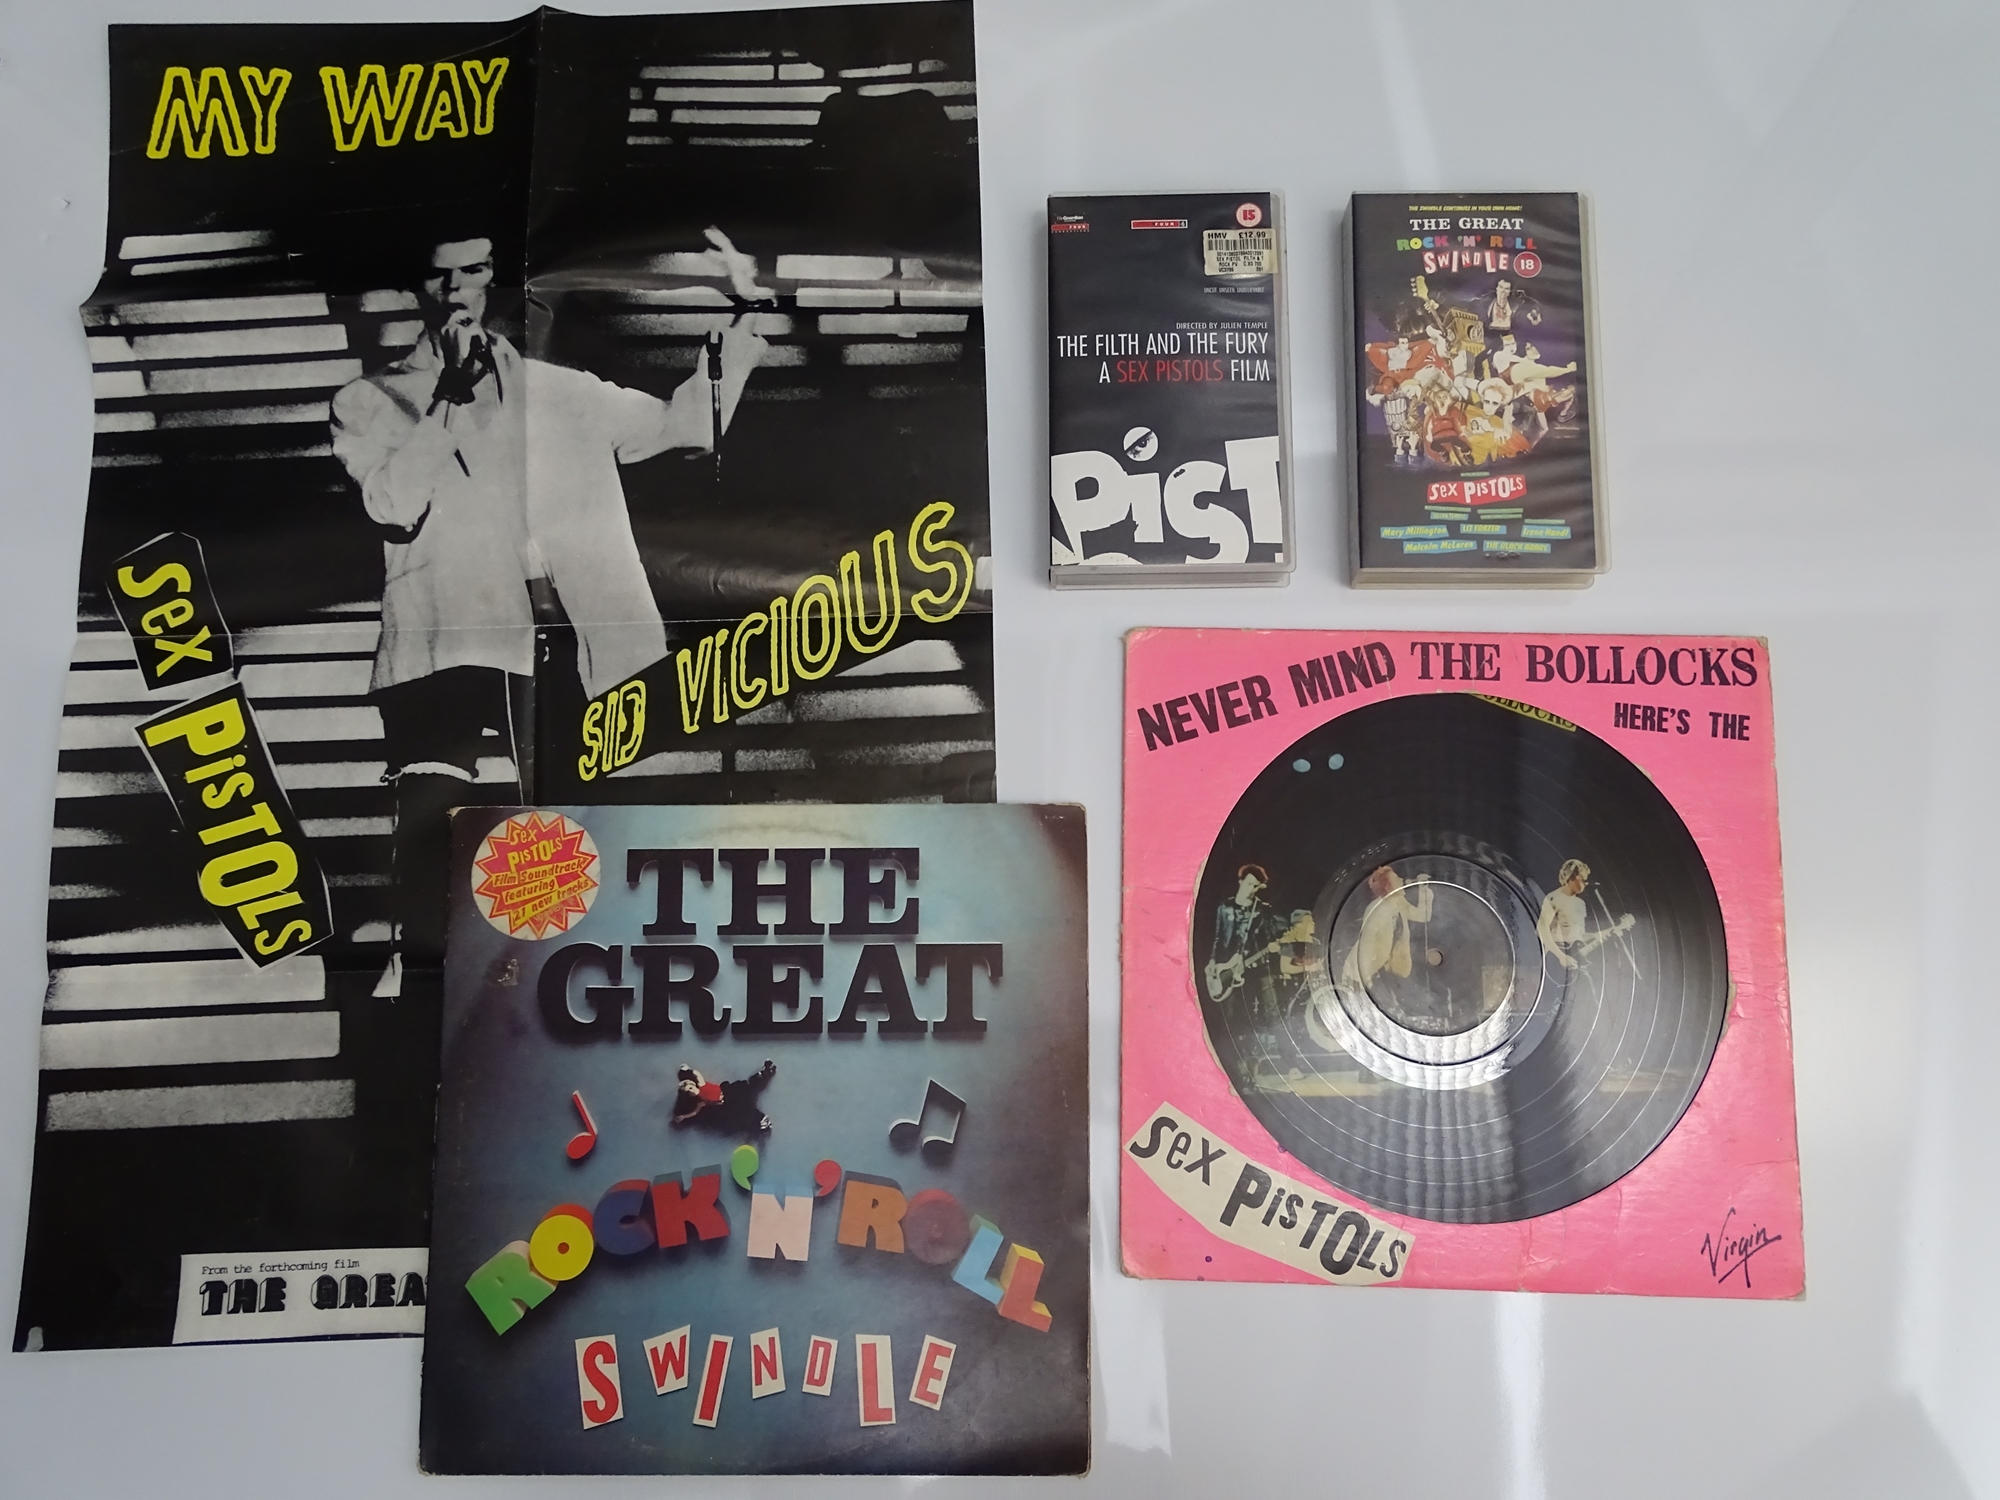 THE SEX PISTOLS: A collection of memorabilia to include: 2 X 12" vinyl LPs, 2 X VHS VIDEOS and 1 x